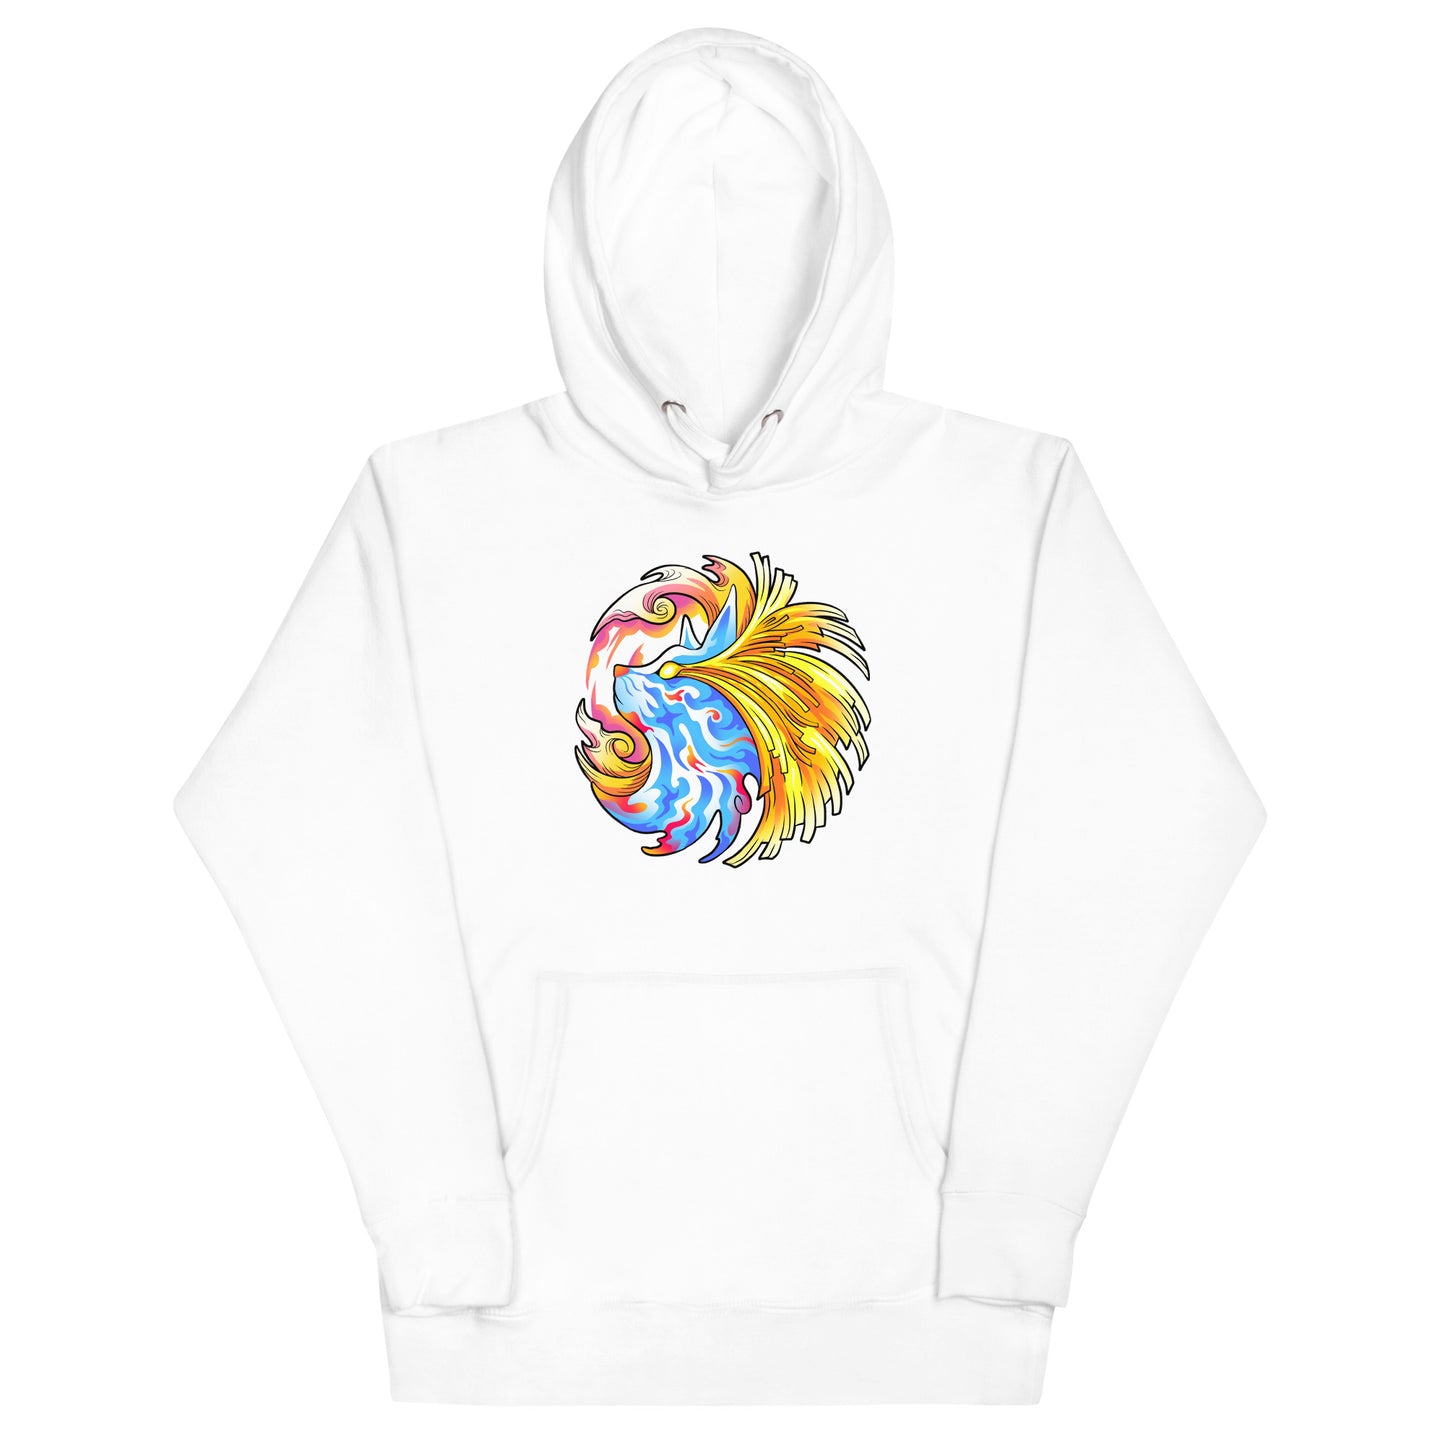 Pharaoh Zebady white hoodie. Psychedelic blue and white cat with energy beams streaming out his eyes and around the head.